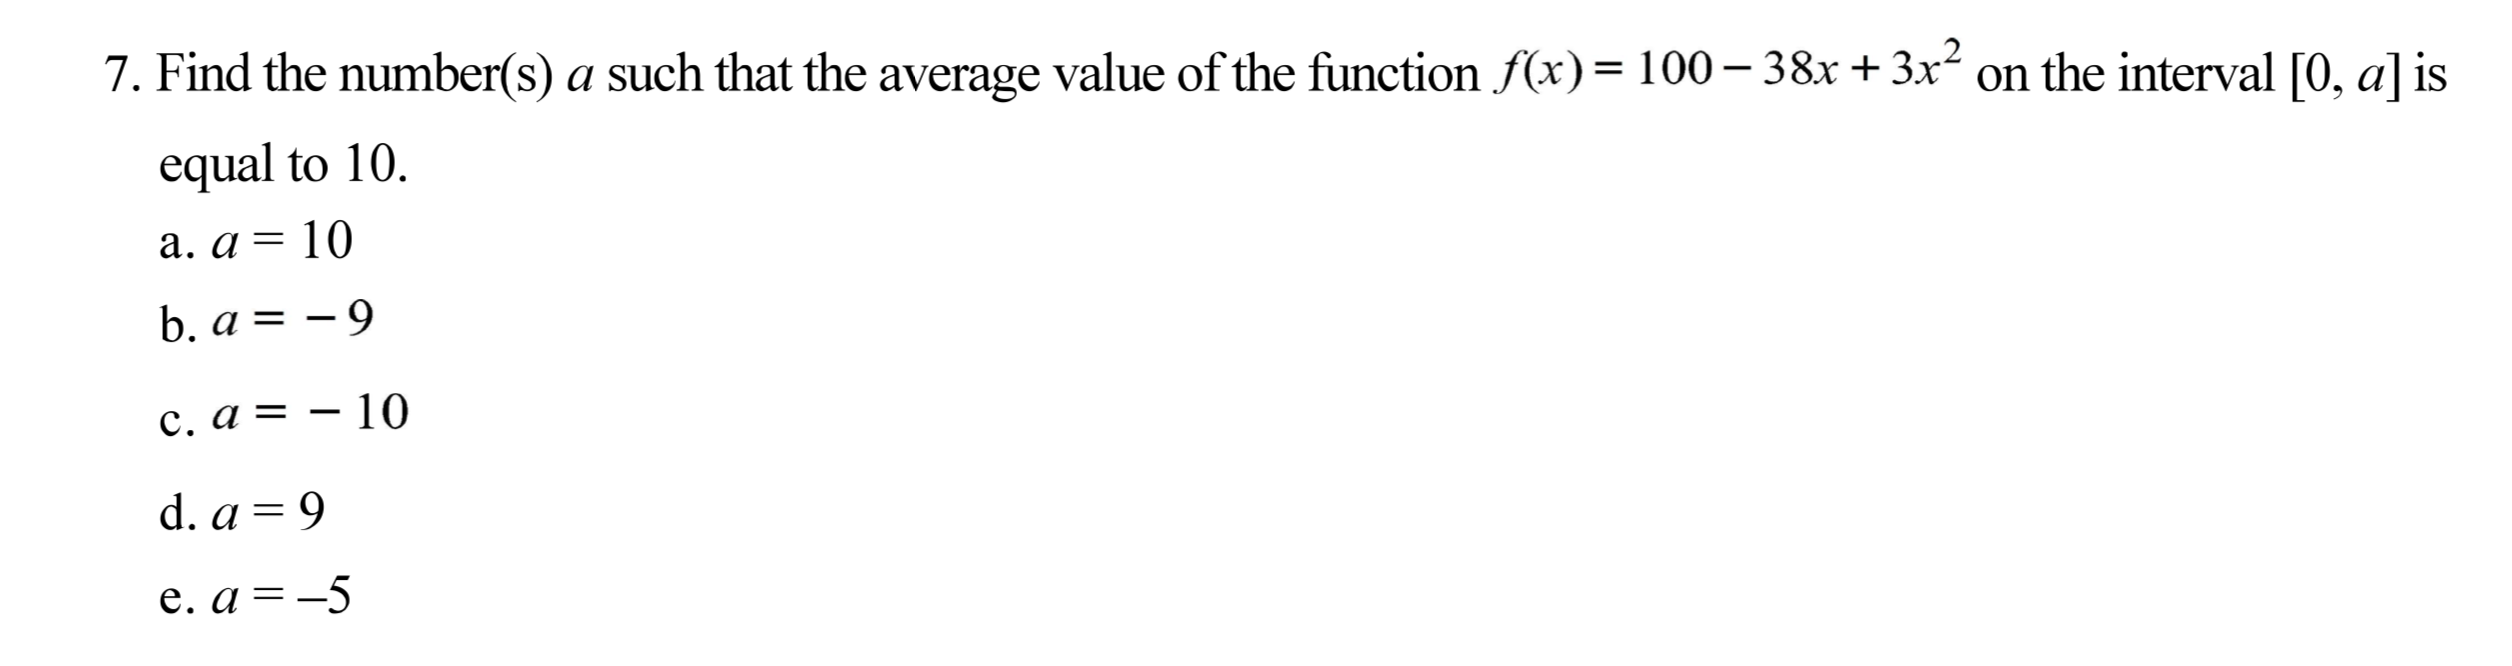 Find the number(s) a such that the average value of the function f(x) = 100– 38x +3x² on the interval [0, a] s
.2
equal to 10.
a. a = 10
b. a = - 9
c. a = – 10
d. a = 9
e. a = -5
